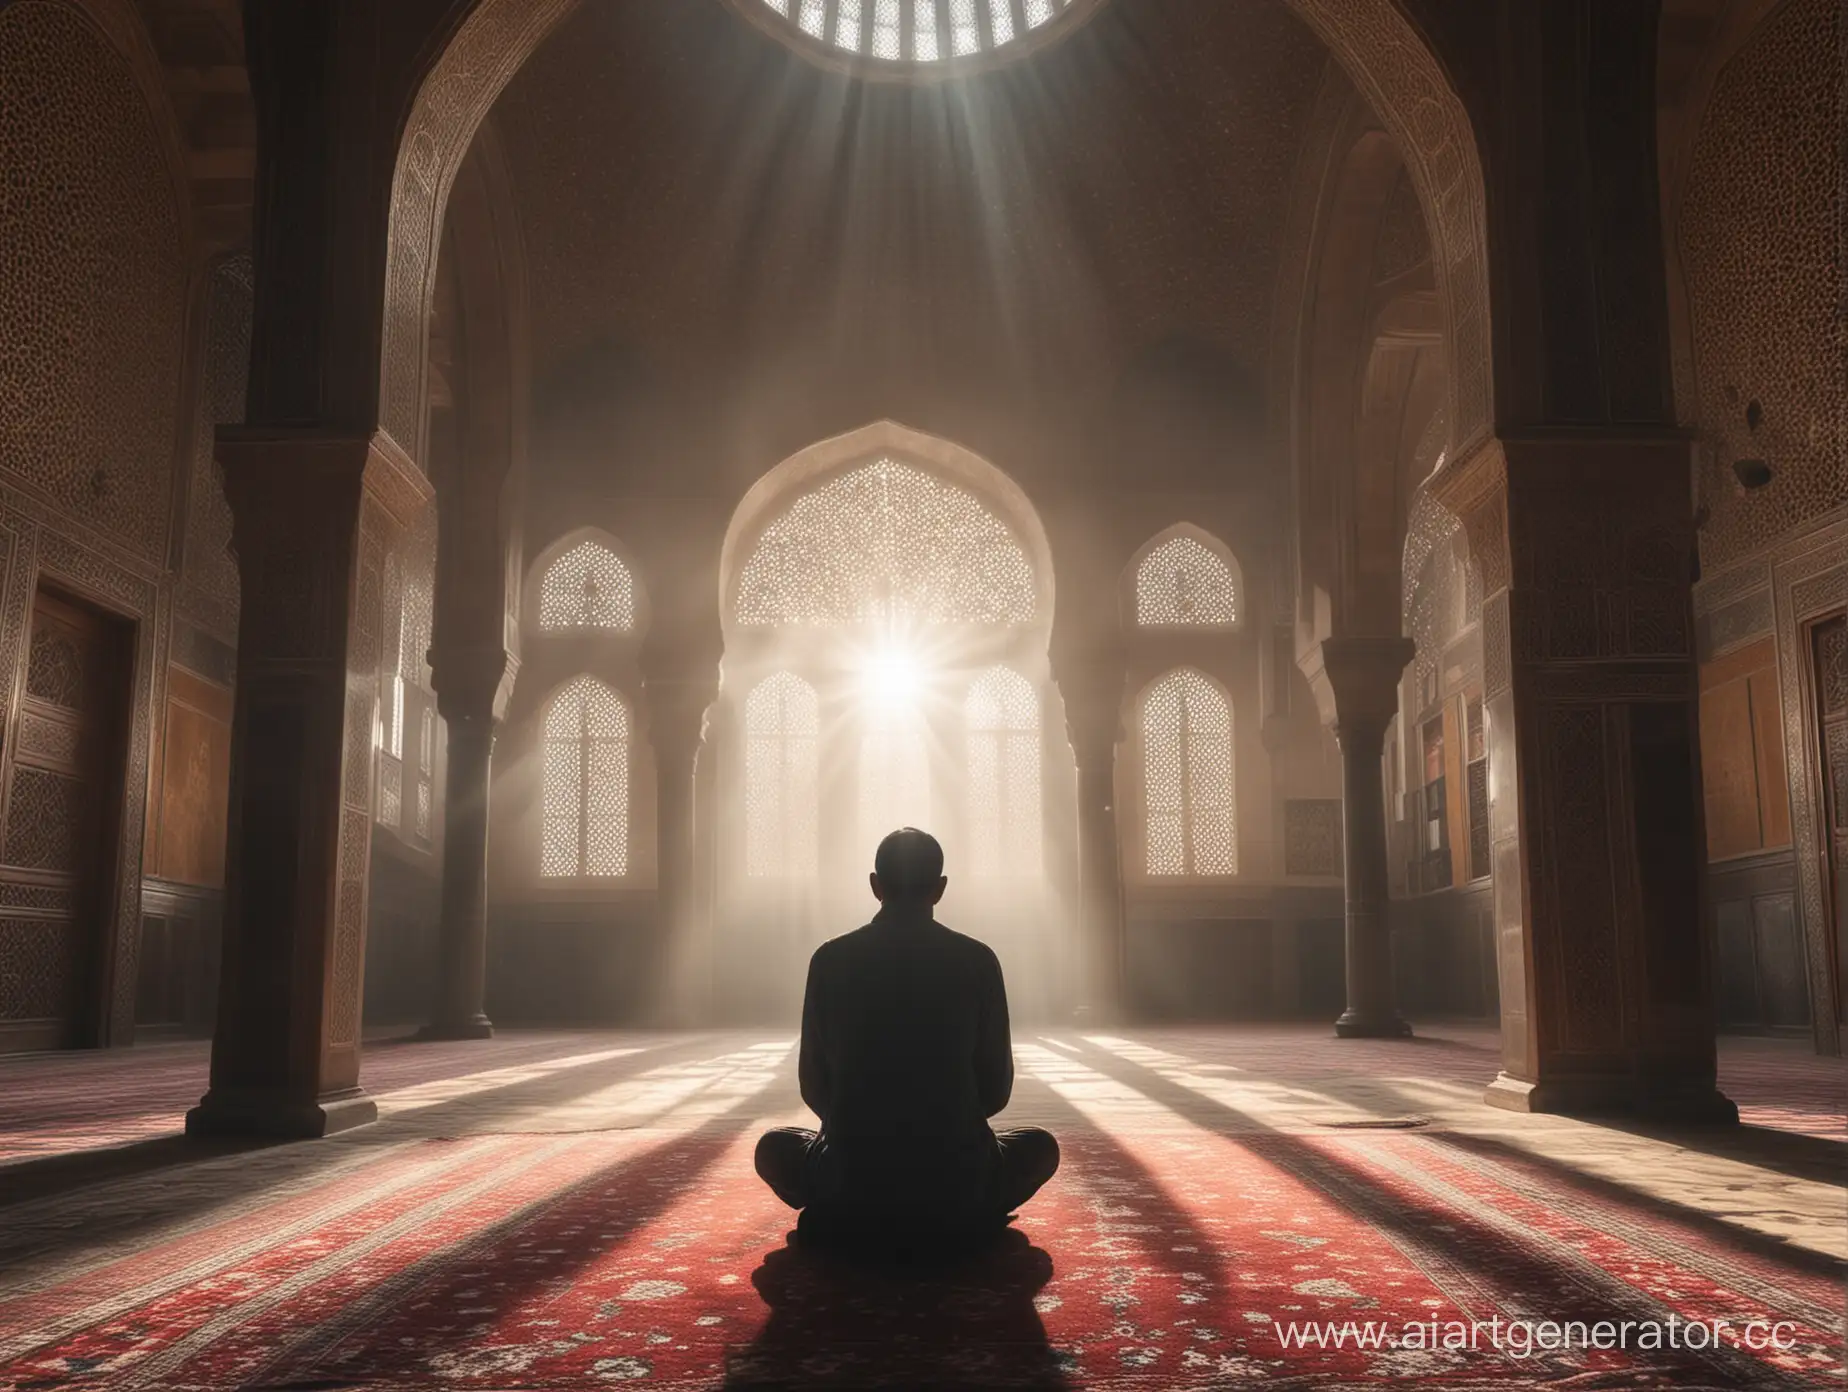 Silhouetted-Figure-Contemplating-in-Magnificent-Mosque-with-Radiant-Dome-and-Books